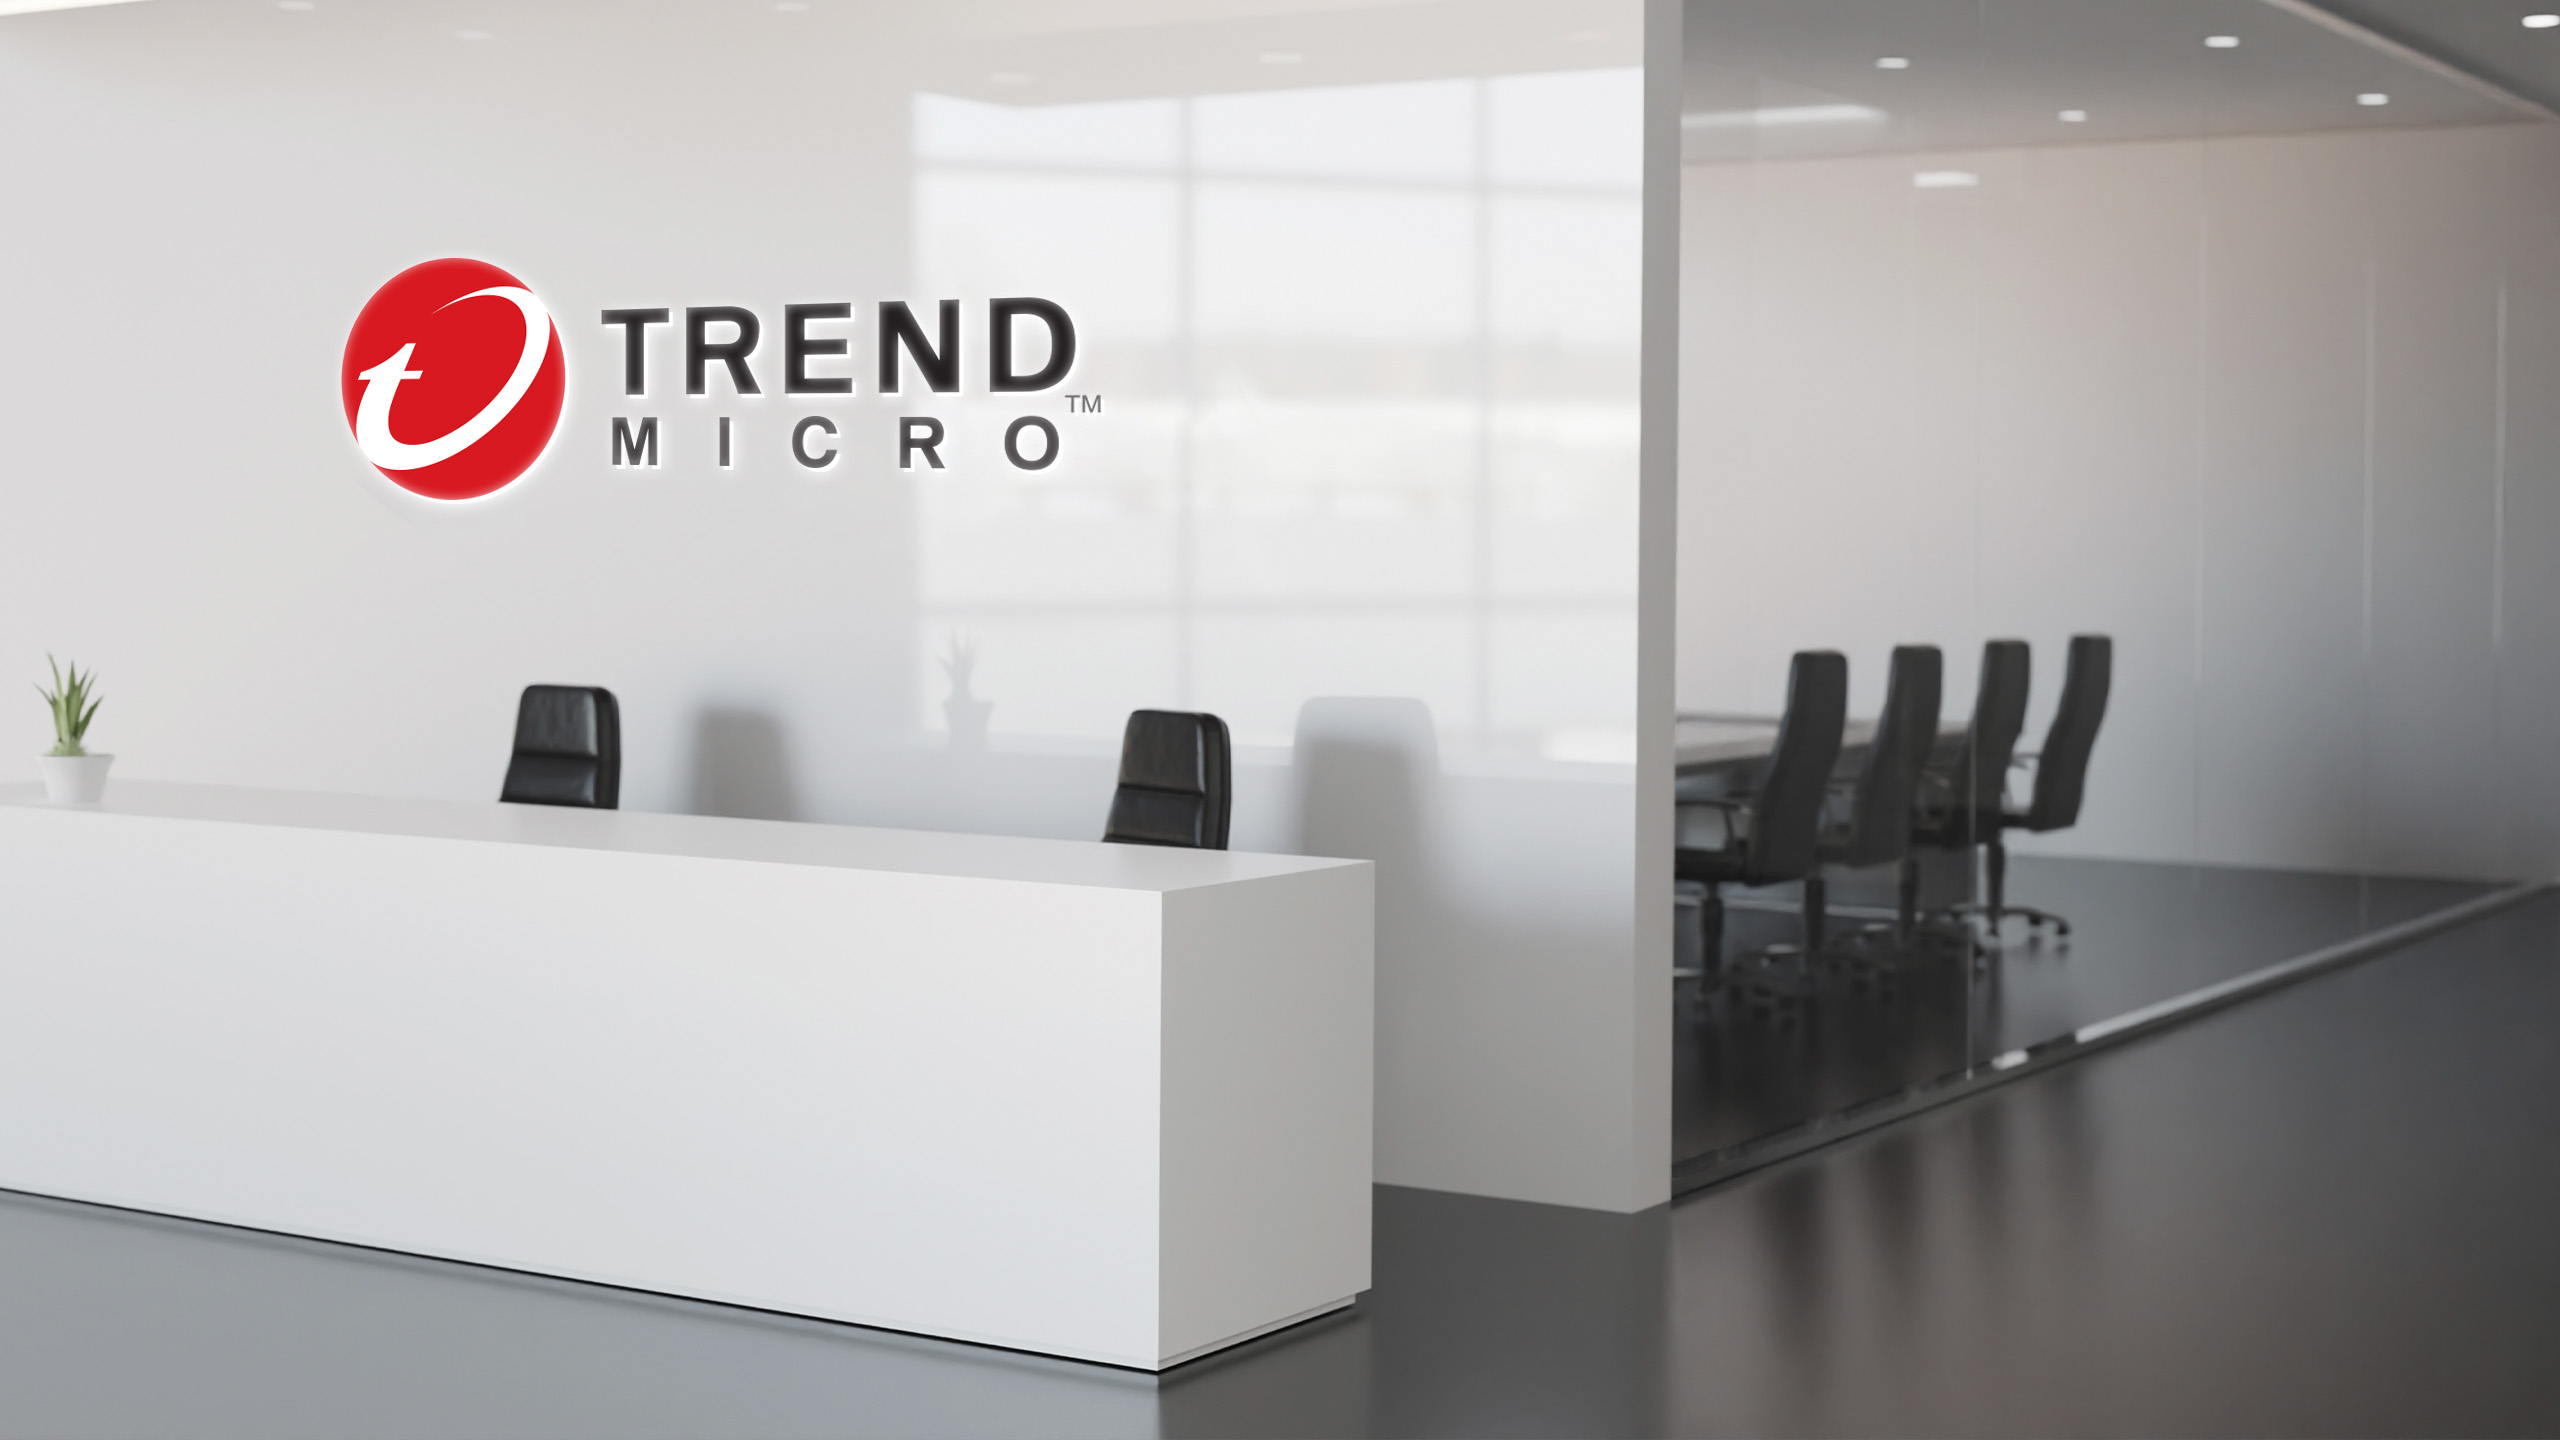 Technical support for Trend Micro